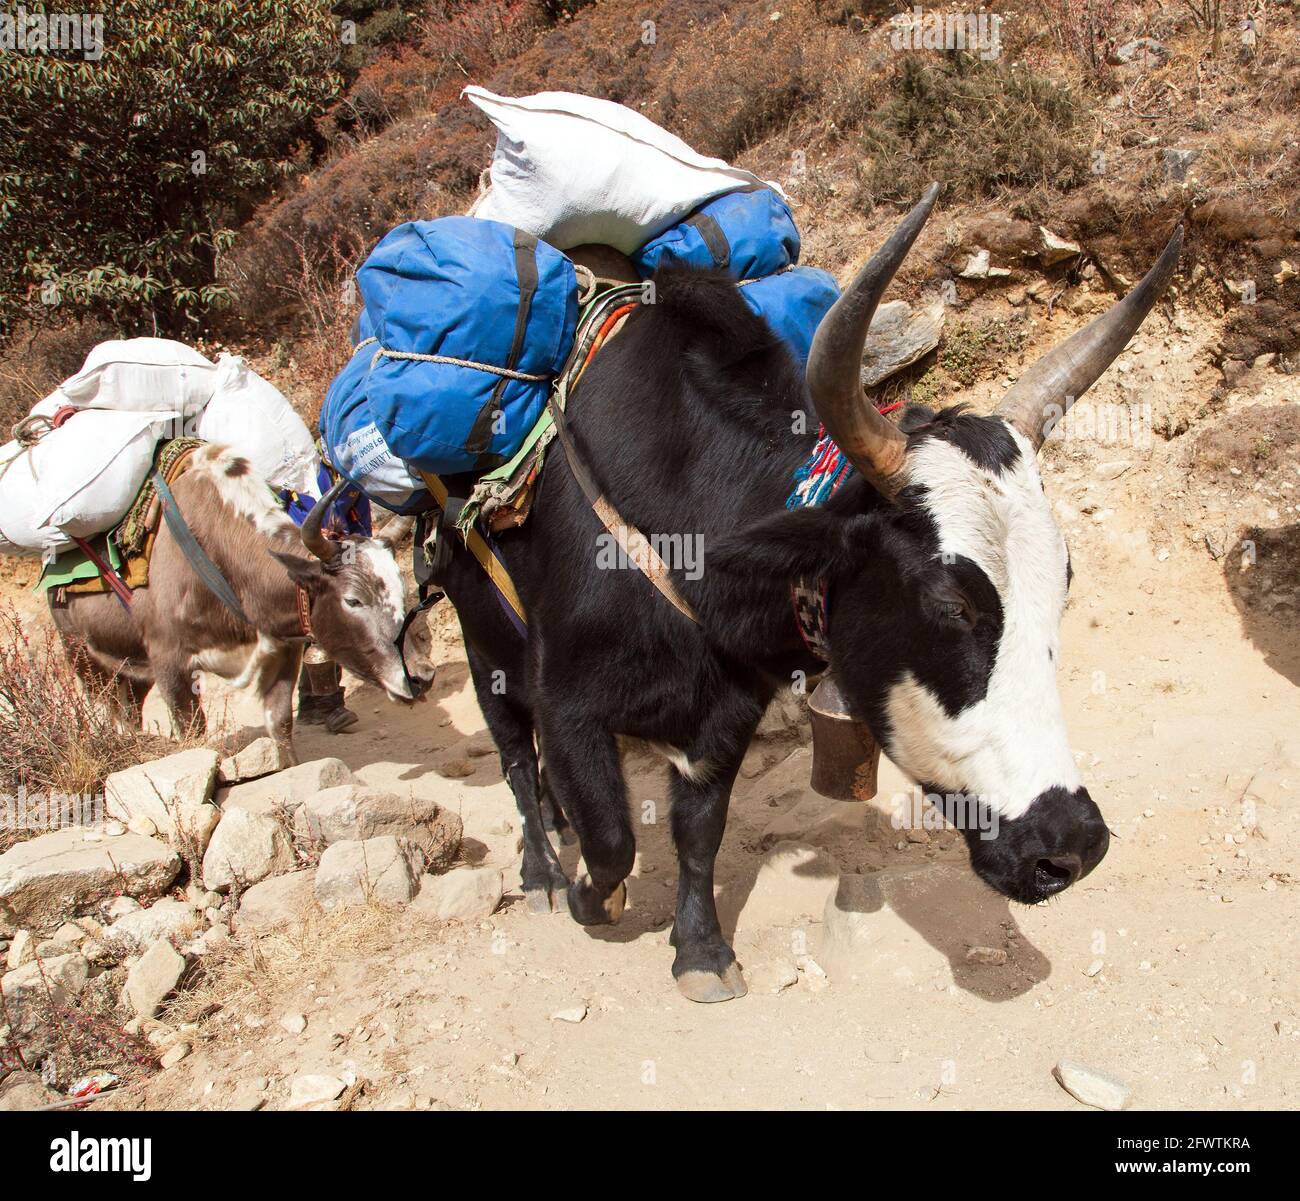 Caravan of yaks, bos grunniens or bos mutus, on the way to Everest base camp - Nepal Himalayas mountains Stock Photo